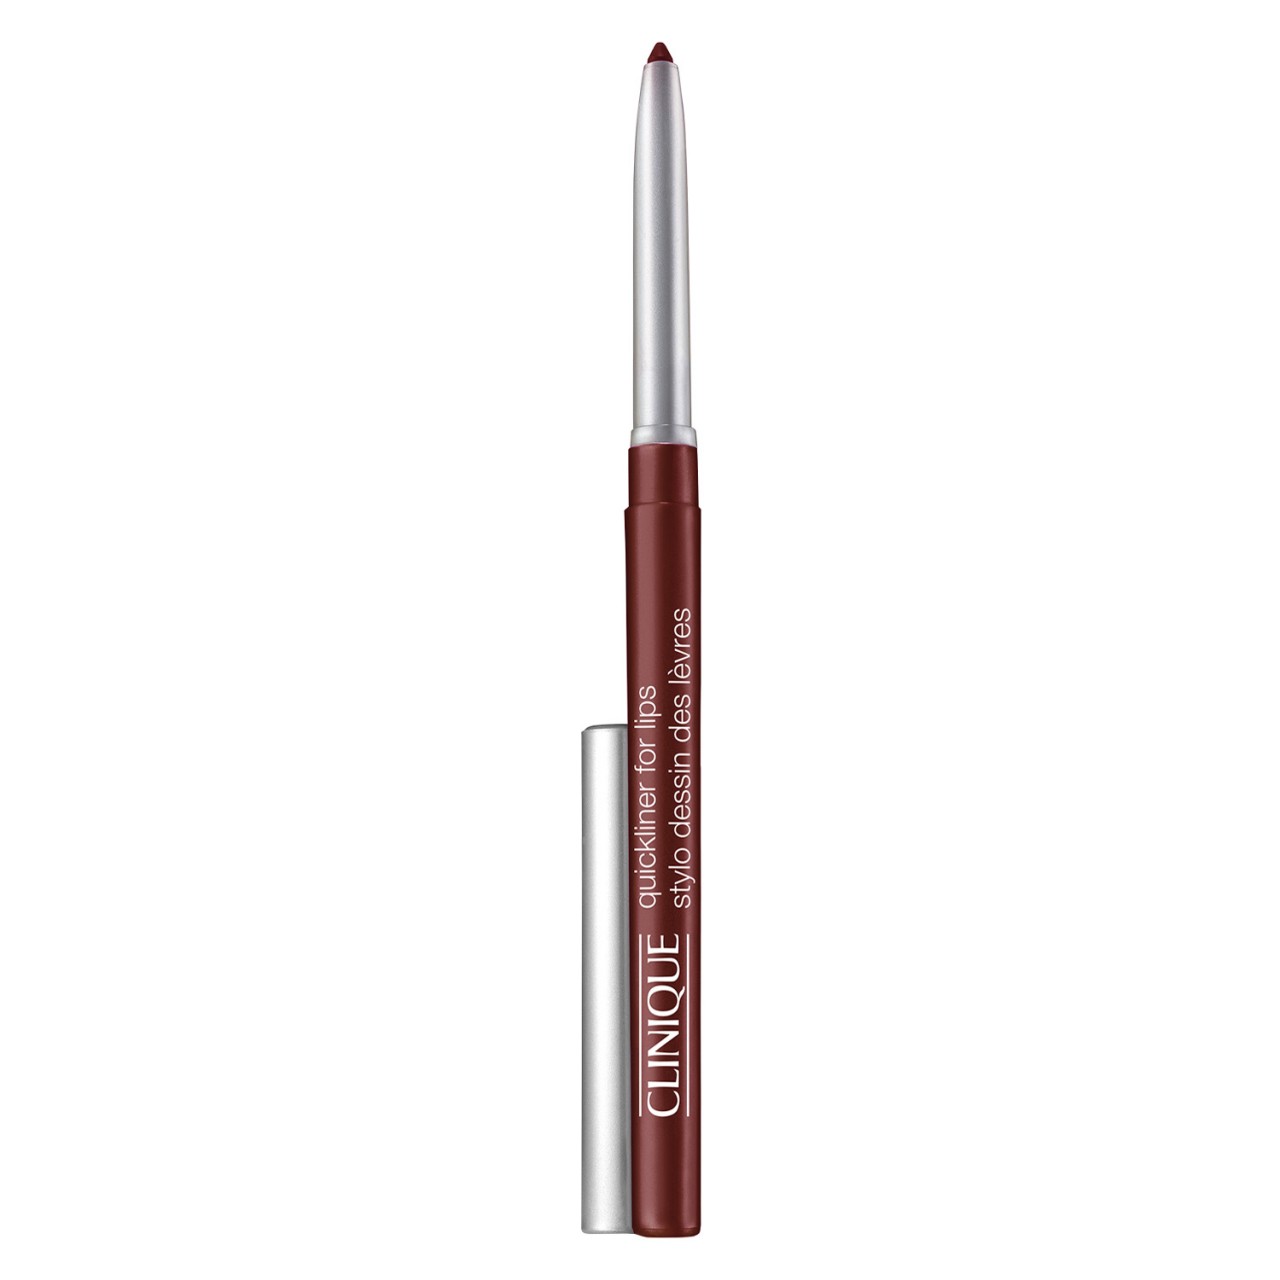 Clinique - Quickliner for Lips - Chocolate Chip